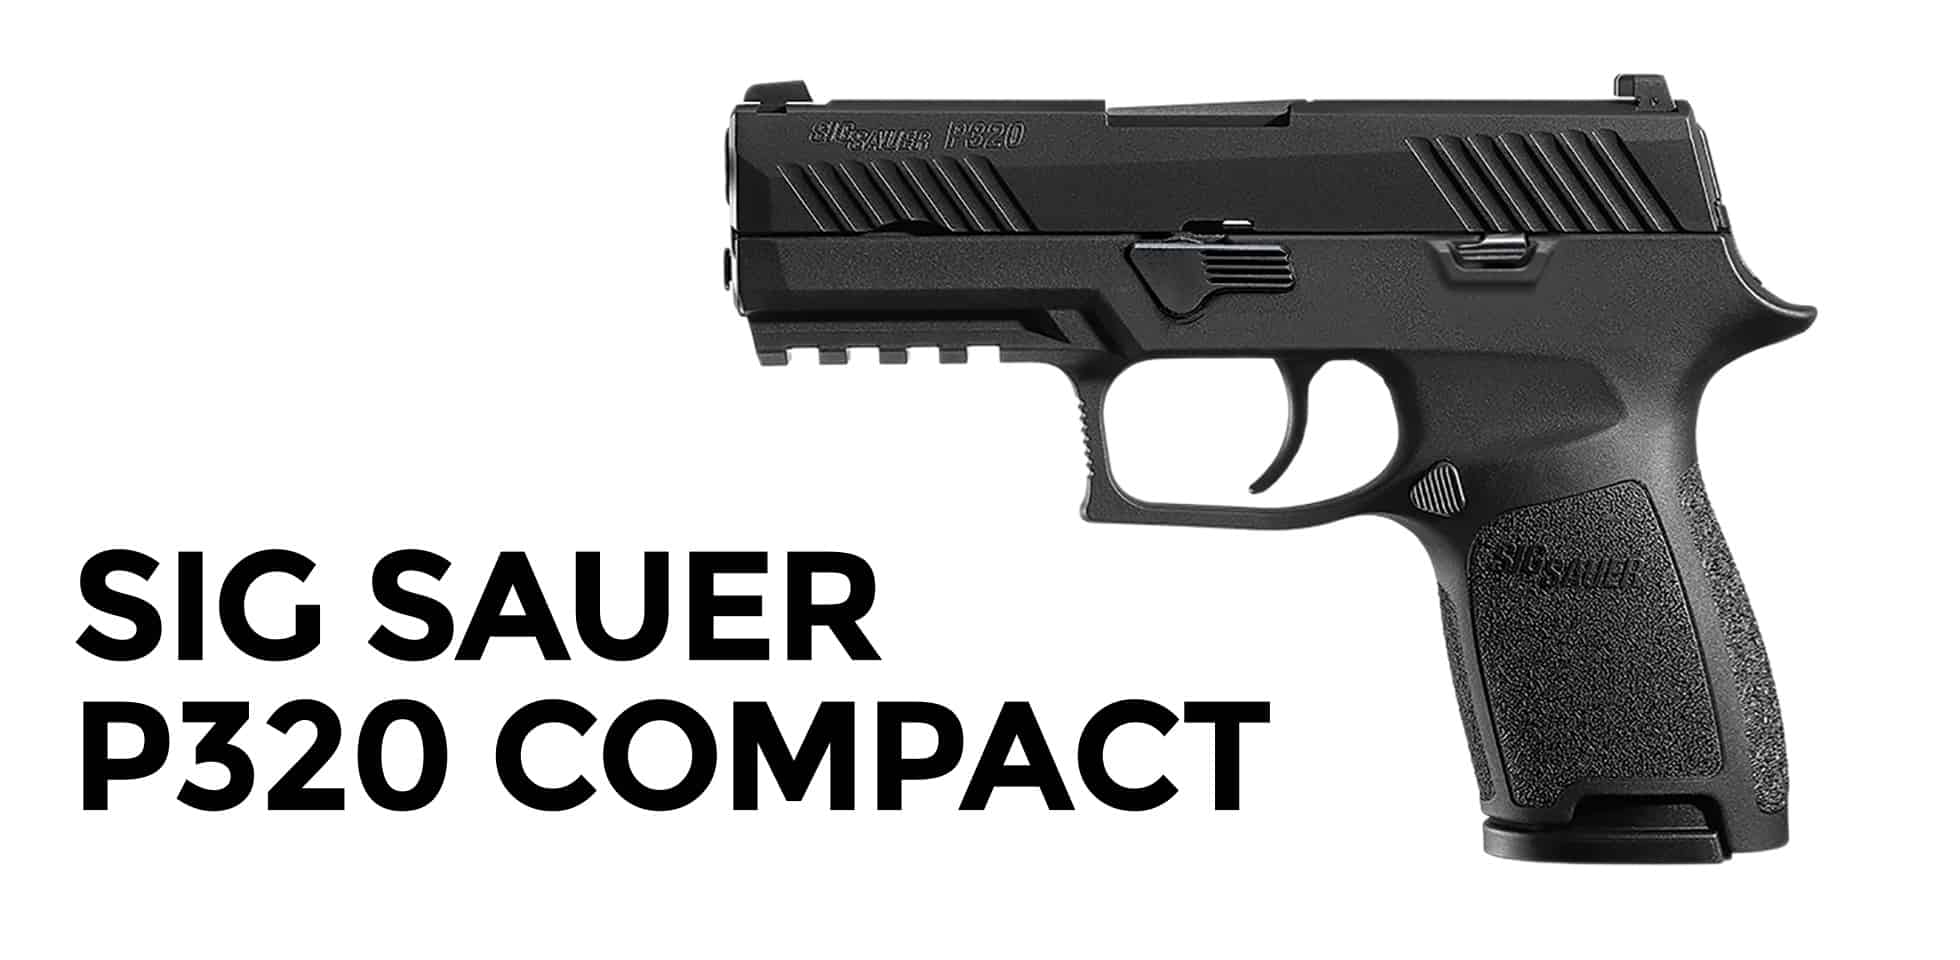 awesome pistol for the price - the Sig Sauer P320 Compact